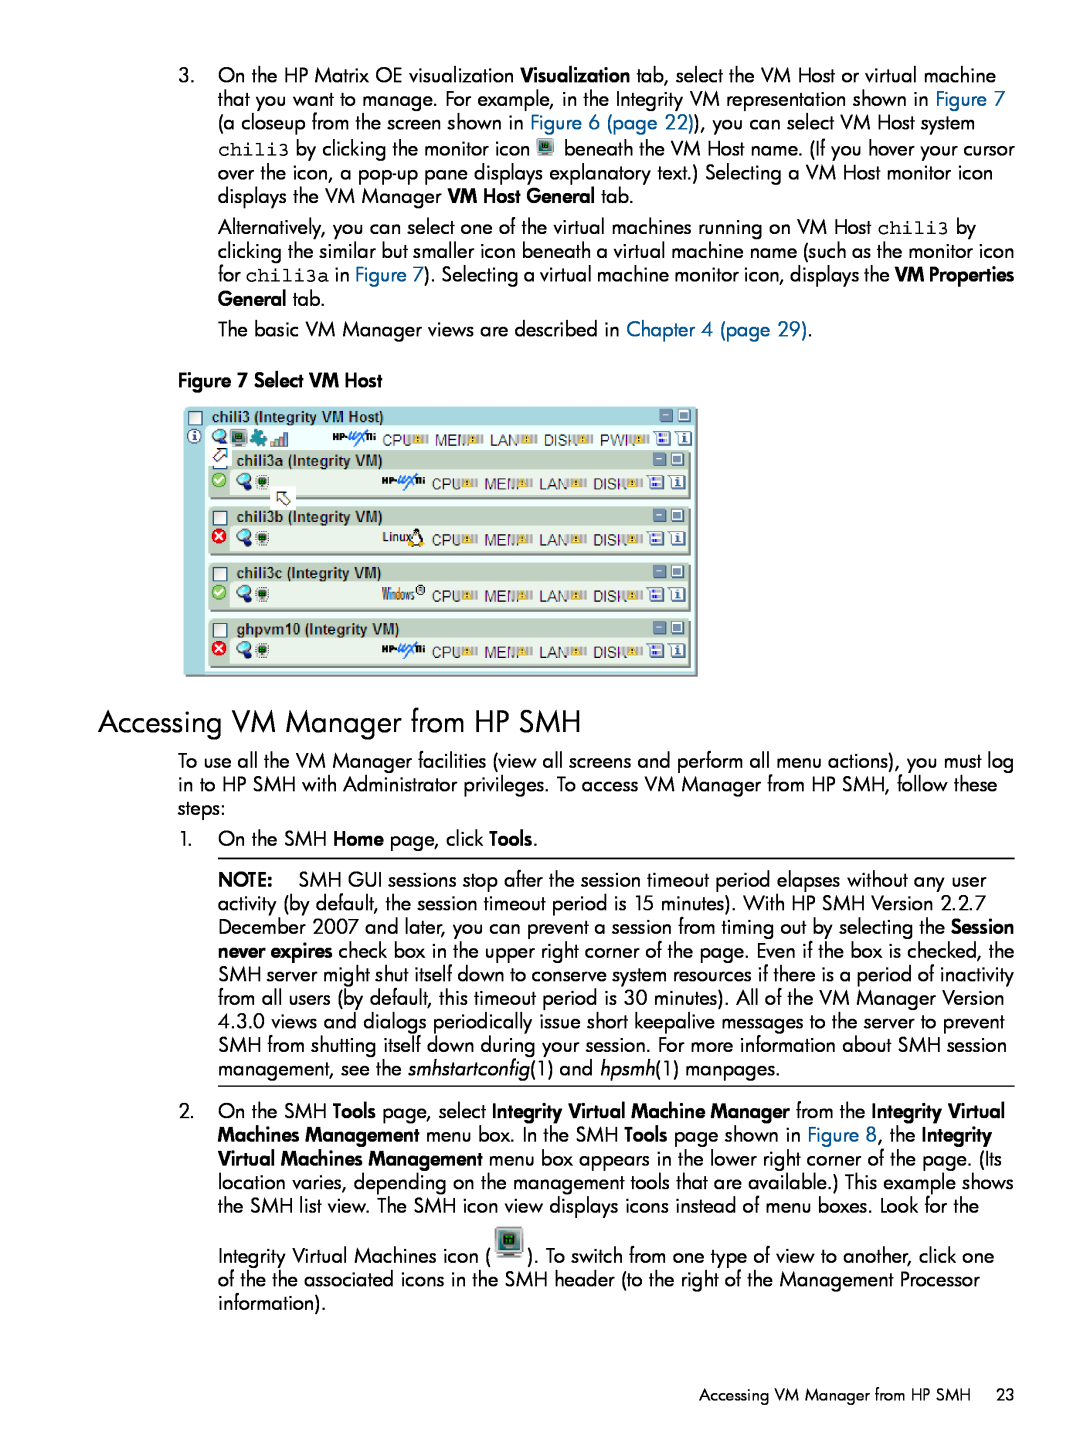 HP UX vPars and Integrity VM v6 manual Accessing VM Manager from HP SMH 